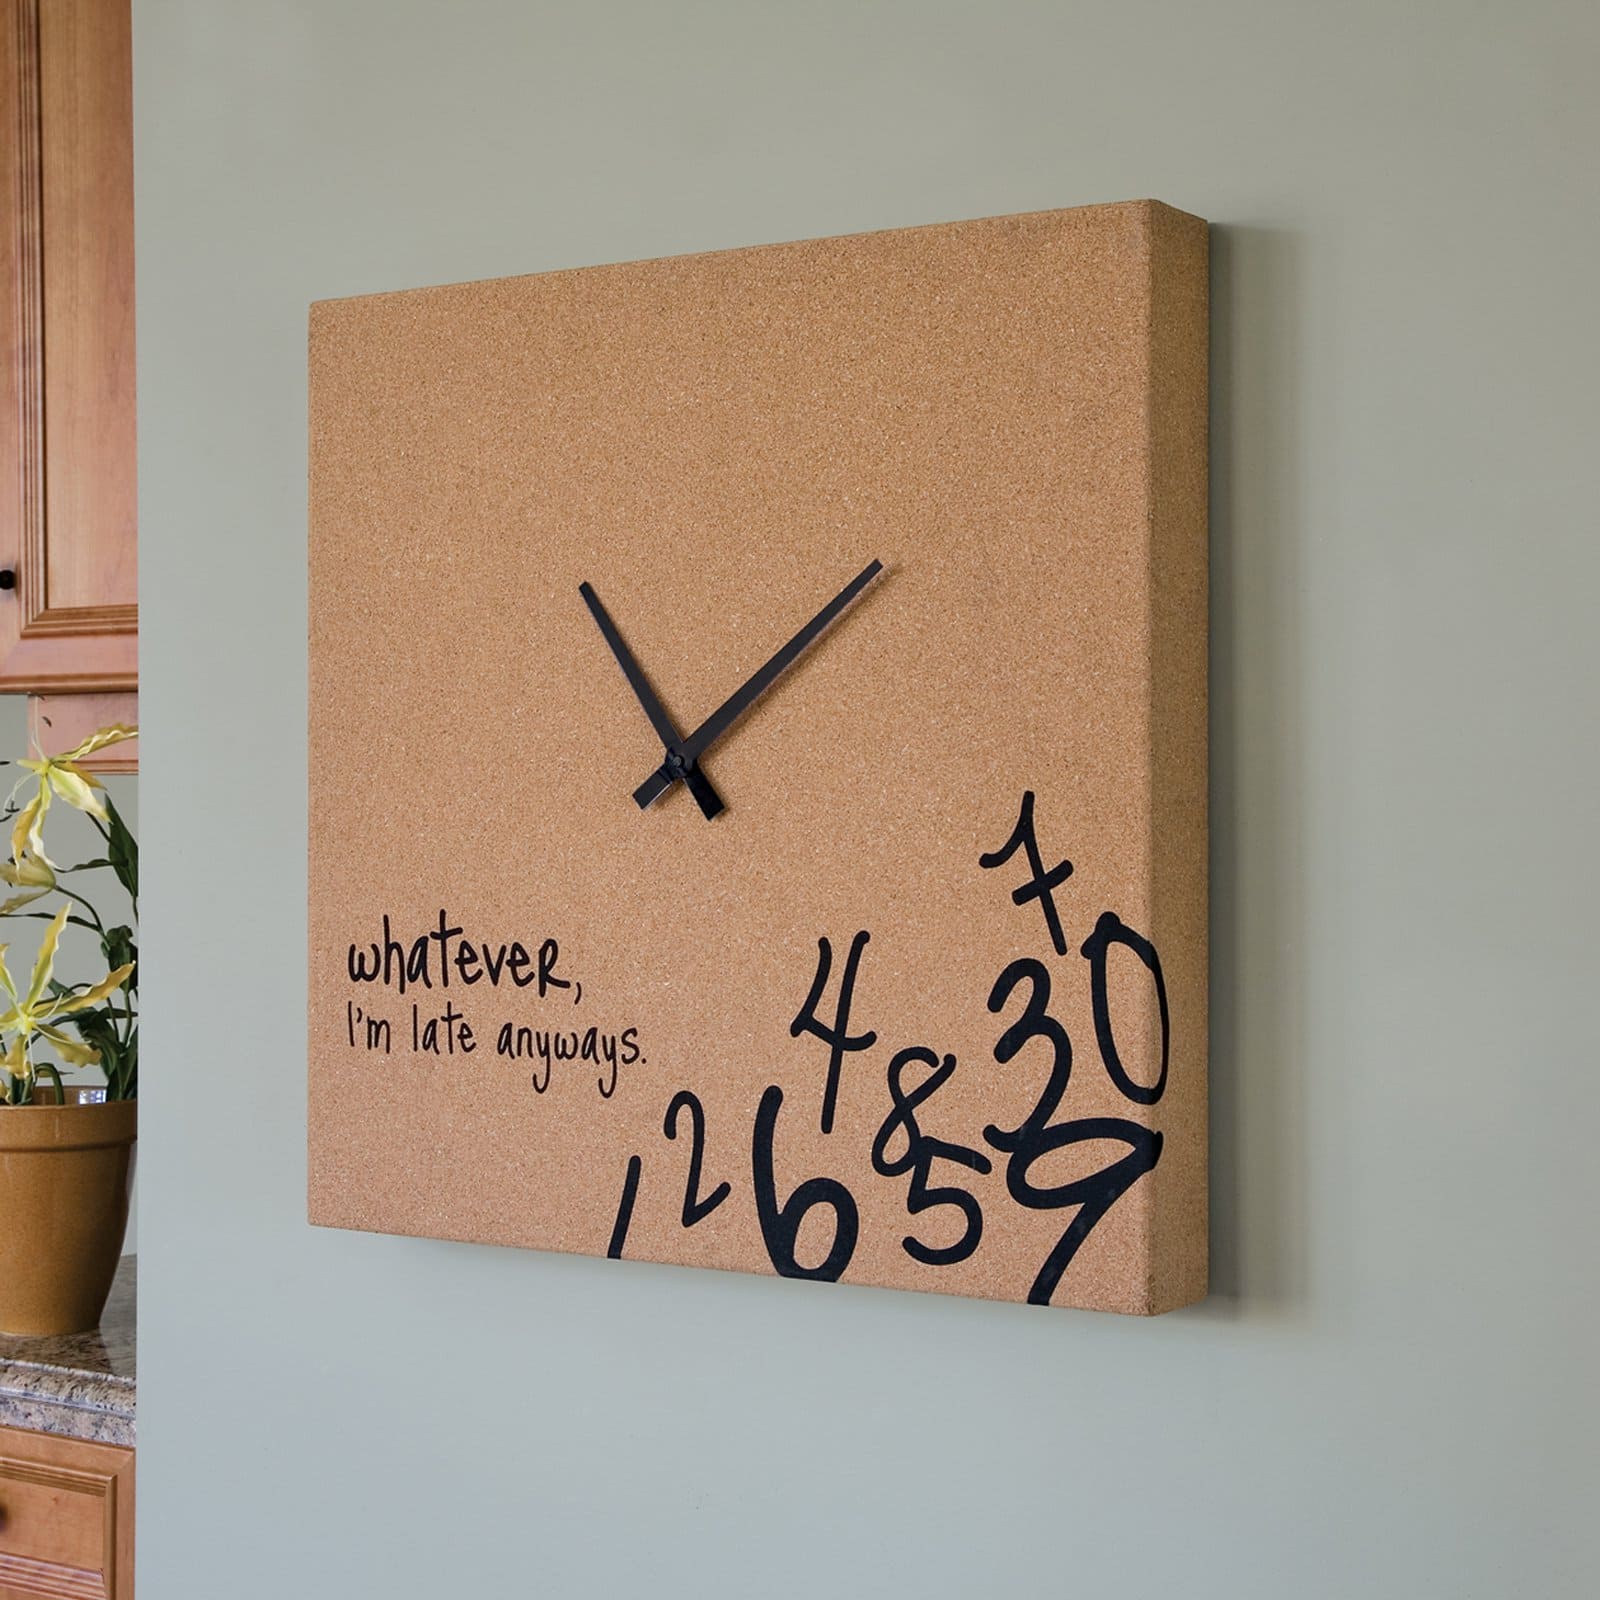 The clock for those who are always late